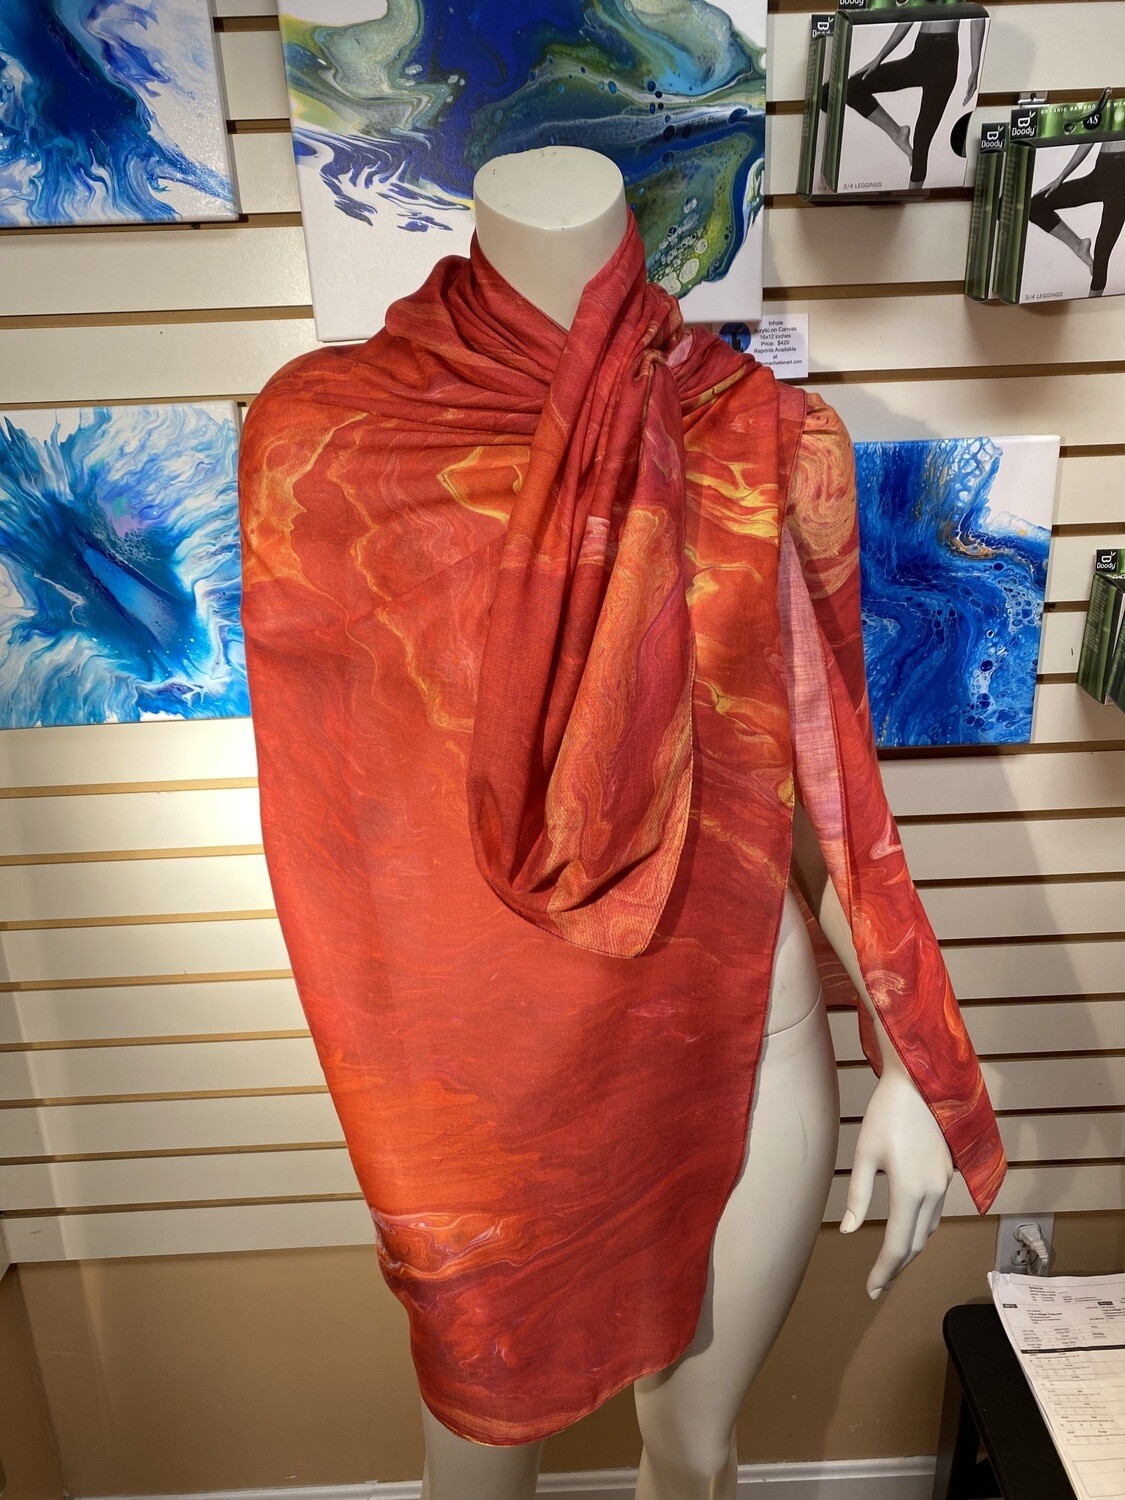 Nahah Studios Art To Wear. Made From A Painting. Local Artist. 100% Muslin Hand Made.